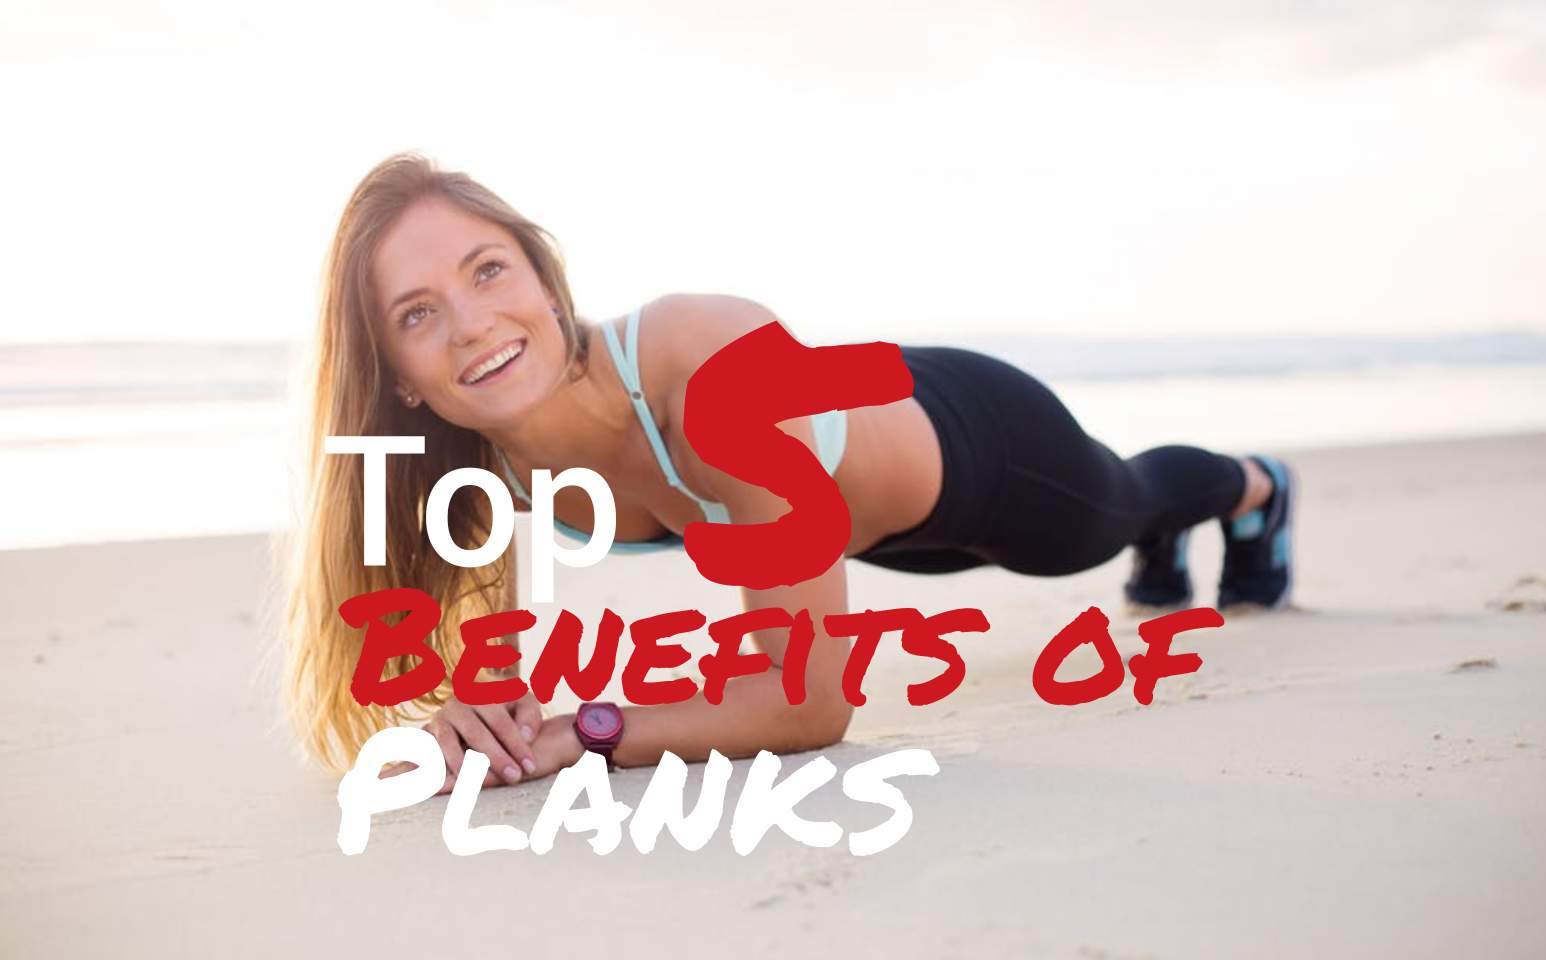 Top 5 Benefits of Planks (Definitive Guide) —